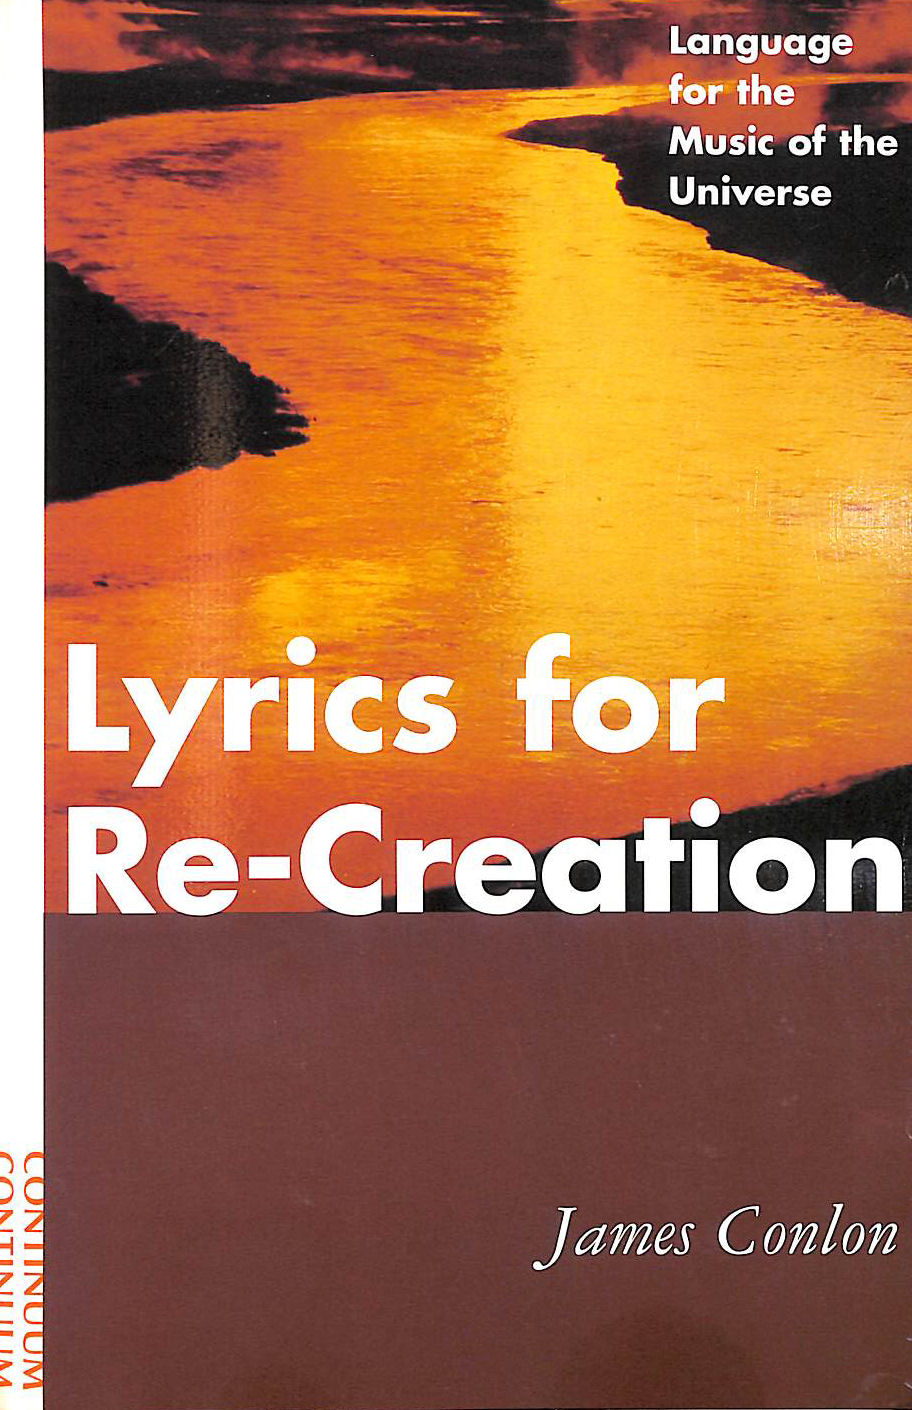 CONLON, JAMES - Lyrics for Re-Creation: Language for the Music of the Universe